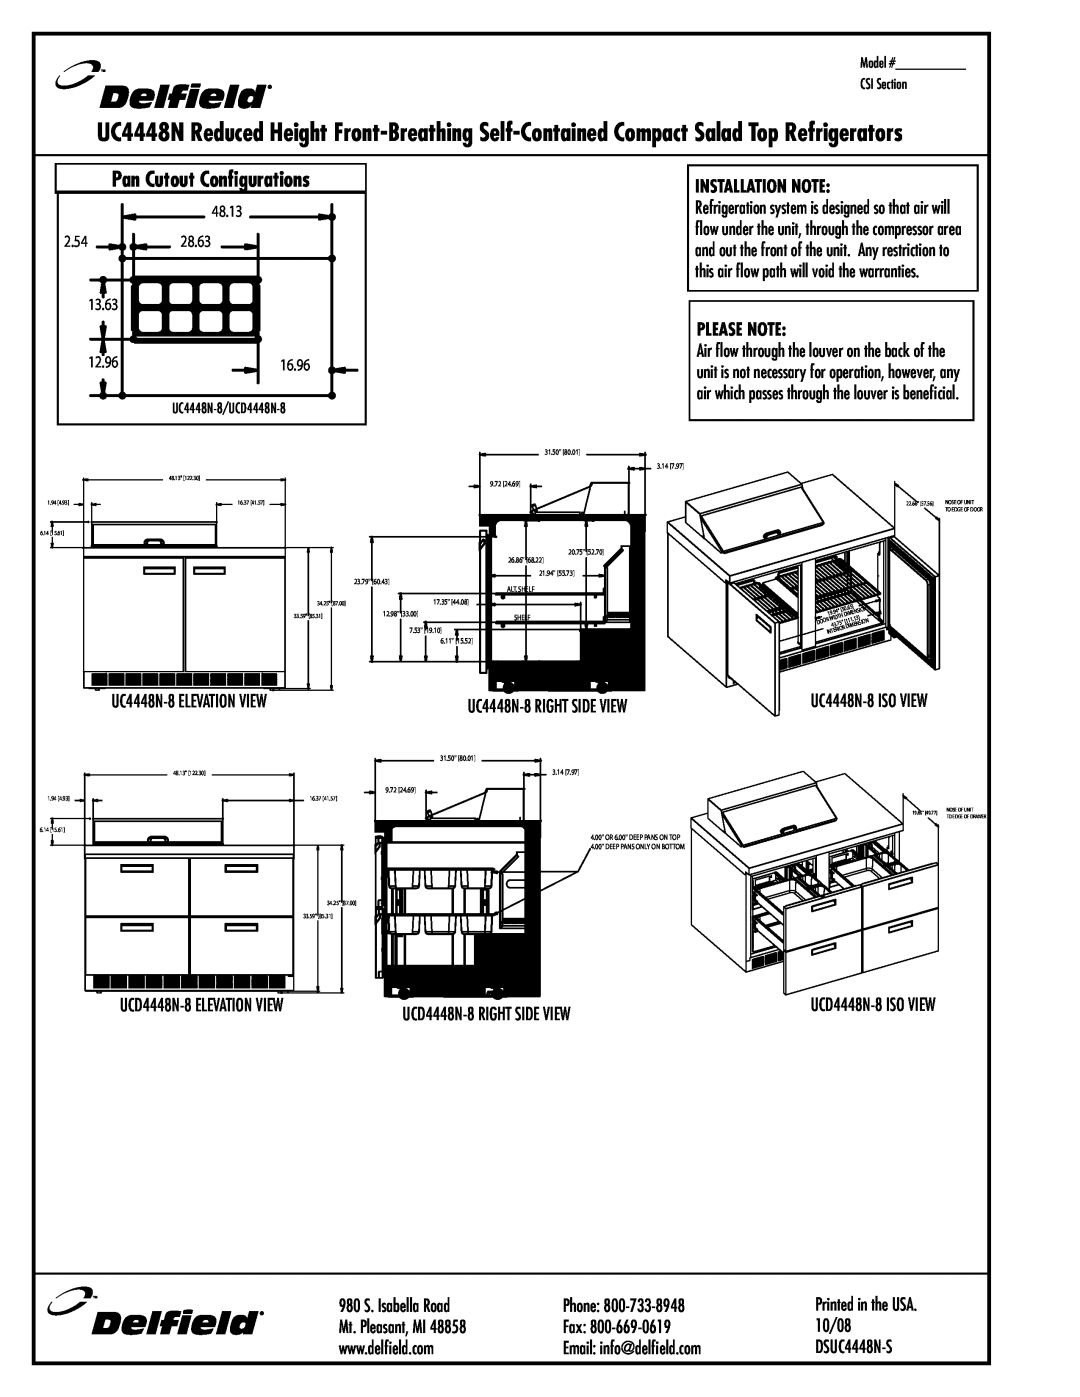 Delfield UC4448N-8, UC4448N-12 specifications Pan Cutout Configurations, Installation Note, Please Note 